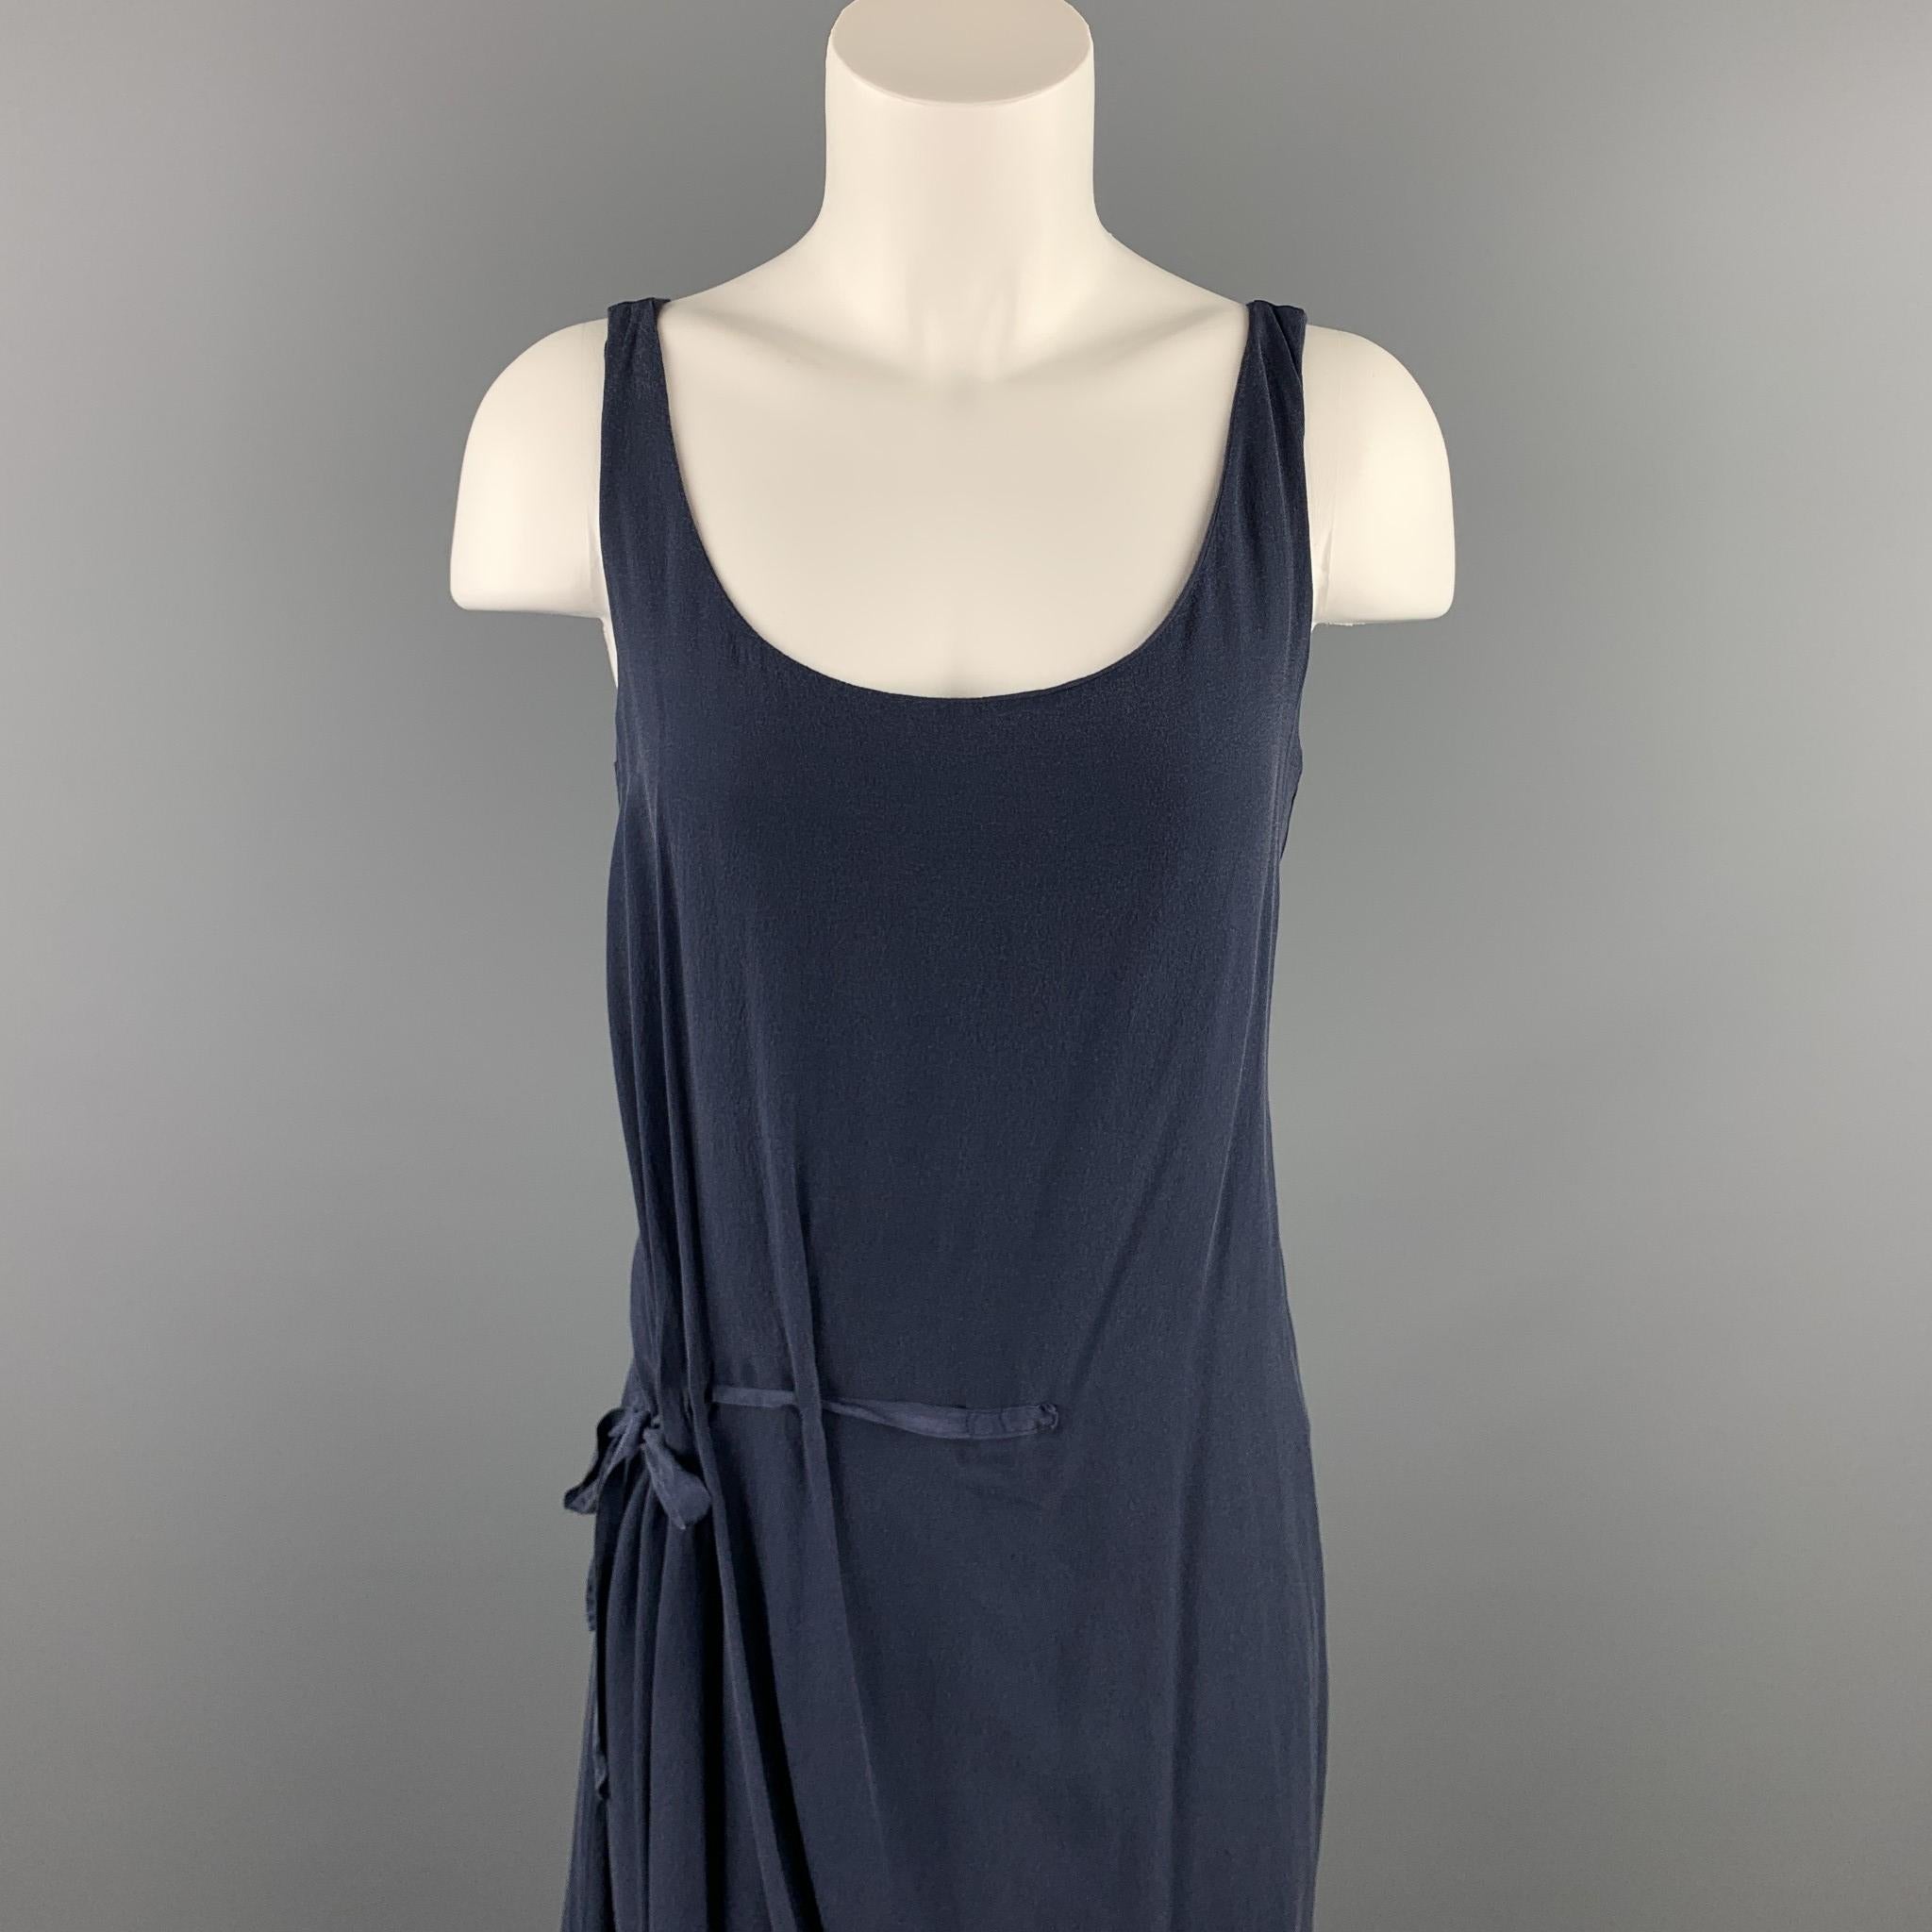 HANNOH sleeveless dress comes in a navy chiffon silk / cotton featuring a gathered tie detail and a scoop neck. Made in France.

Good Pre-Owned Condition.
Marked: F 38

Measurements:

Bust: 30 in. 
Waist: 34 in. 
Hip: 40 in. 
Length: 35.5 in. 